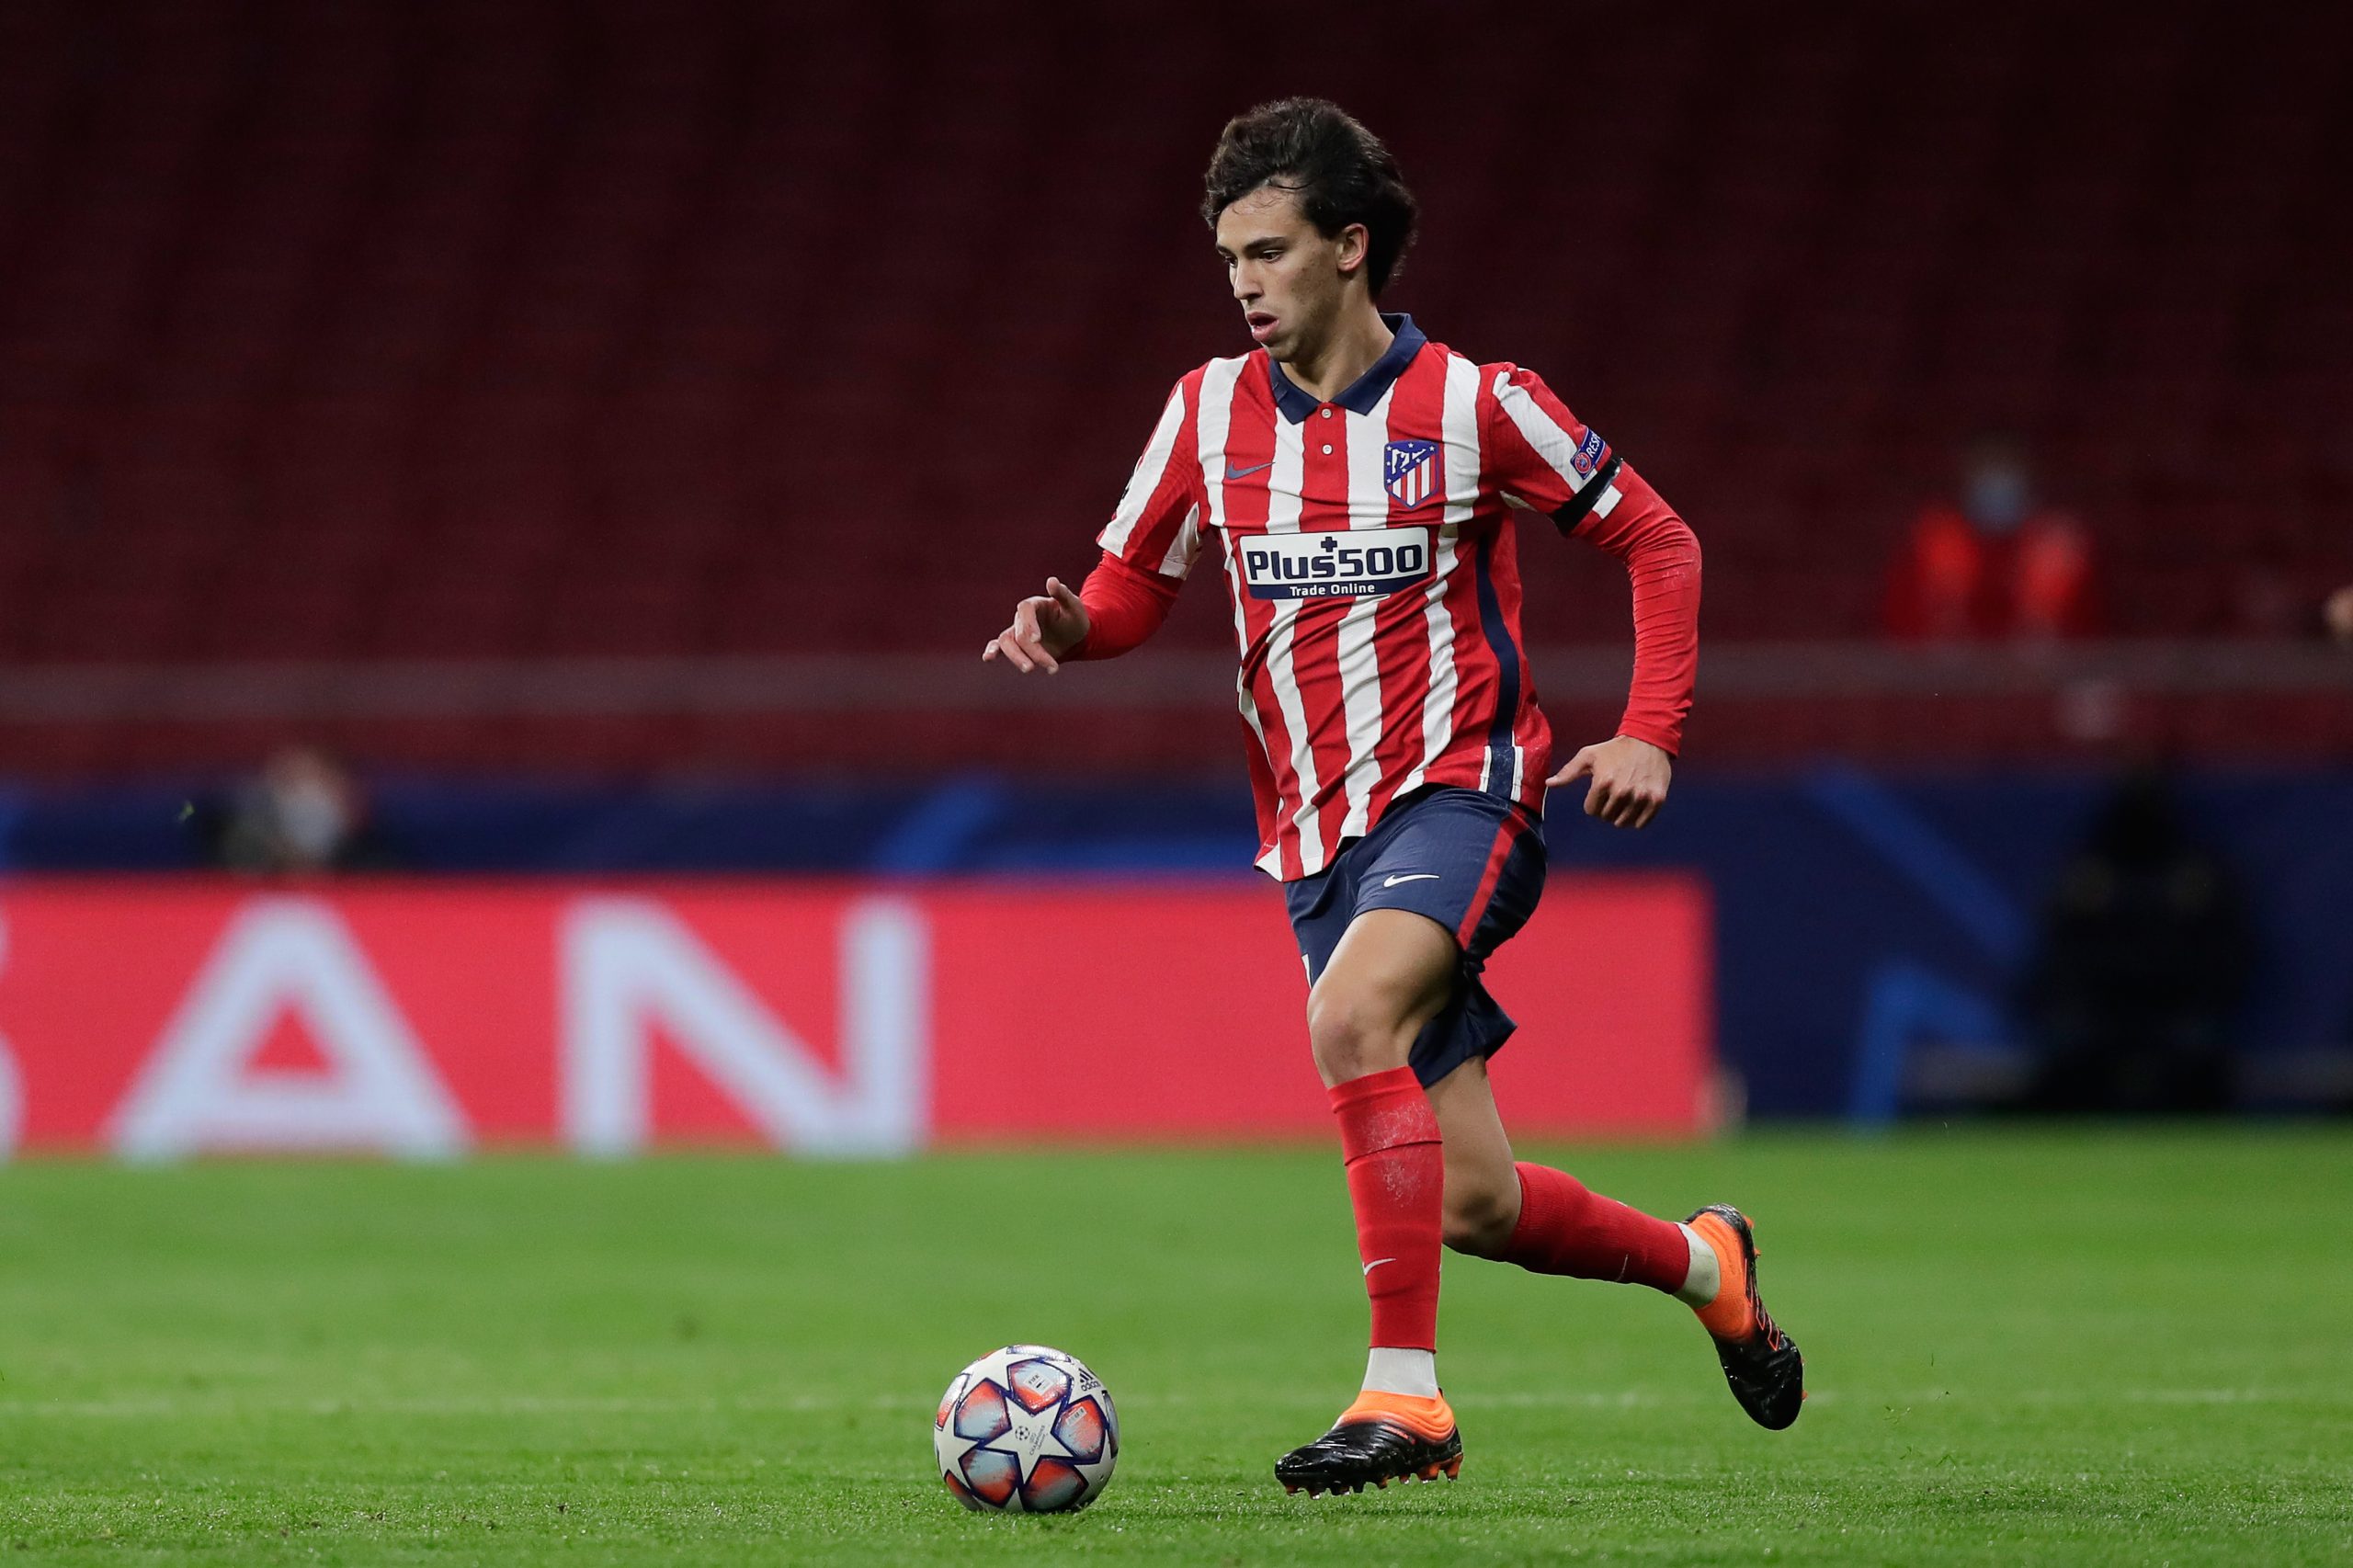 Chelsea reach a verbal agreement to sign Atletico Madrid star Joao Felix on loan.